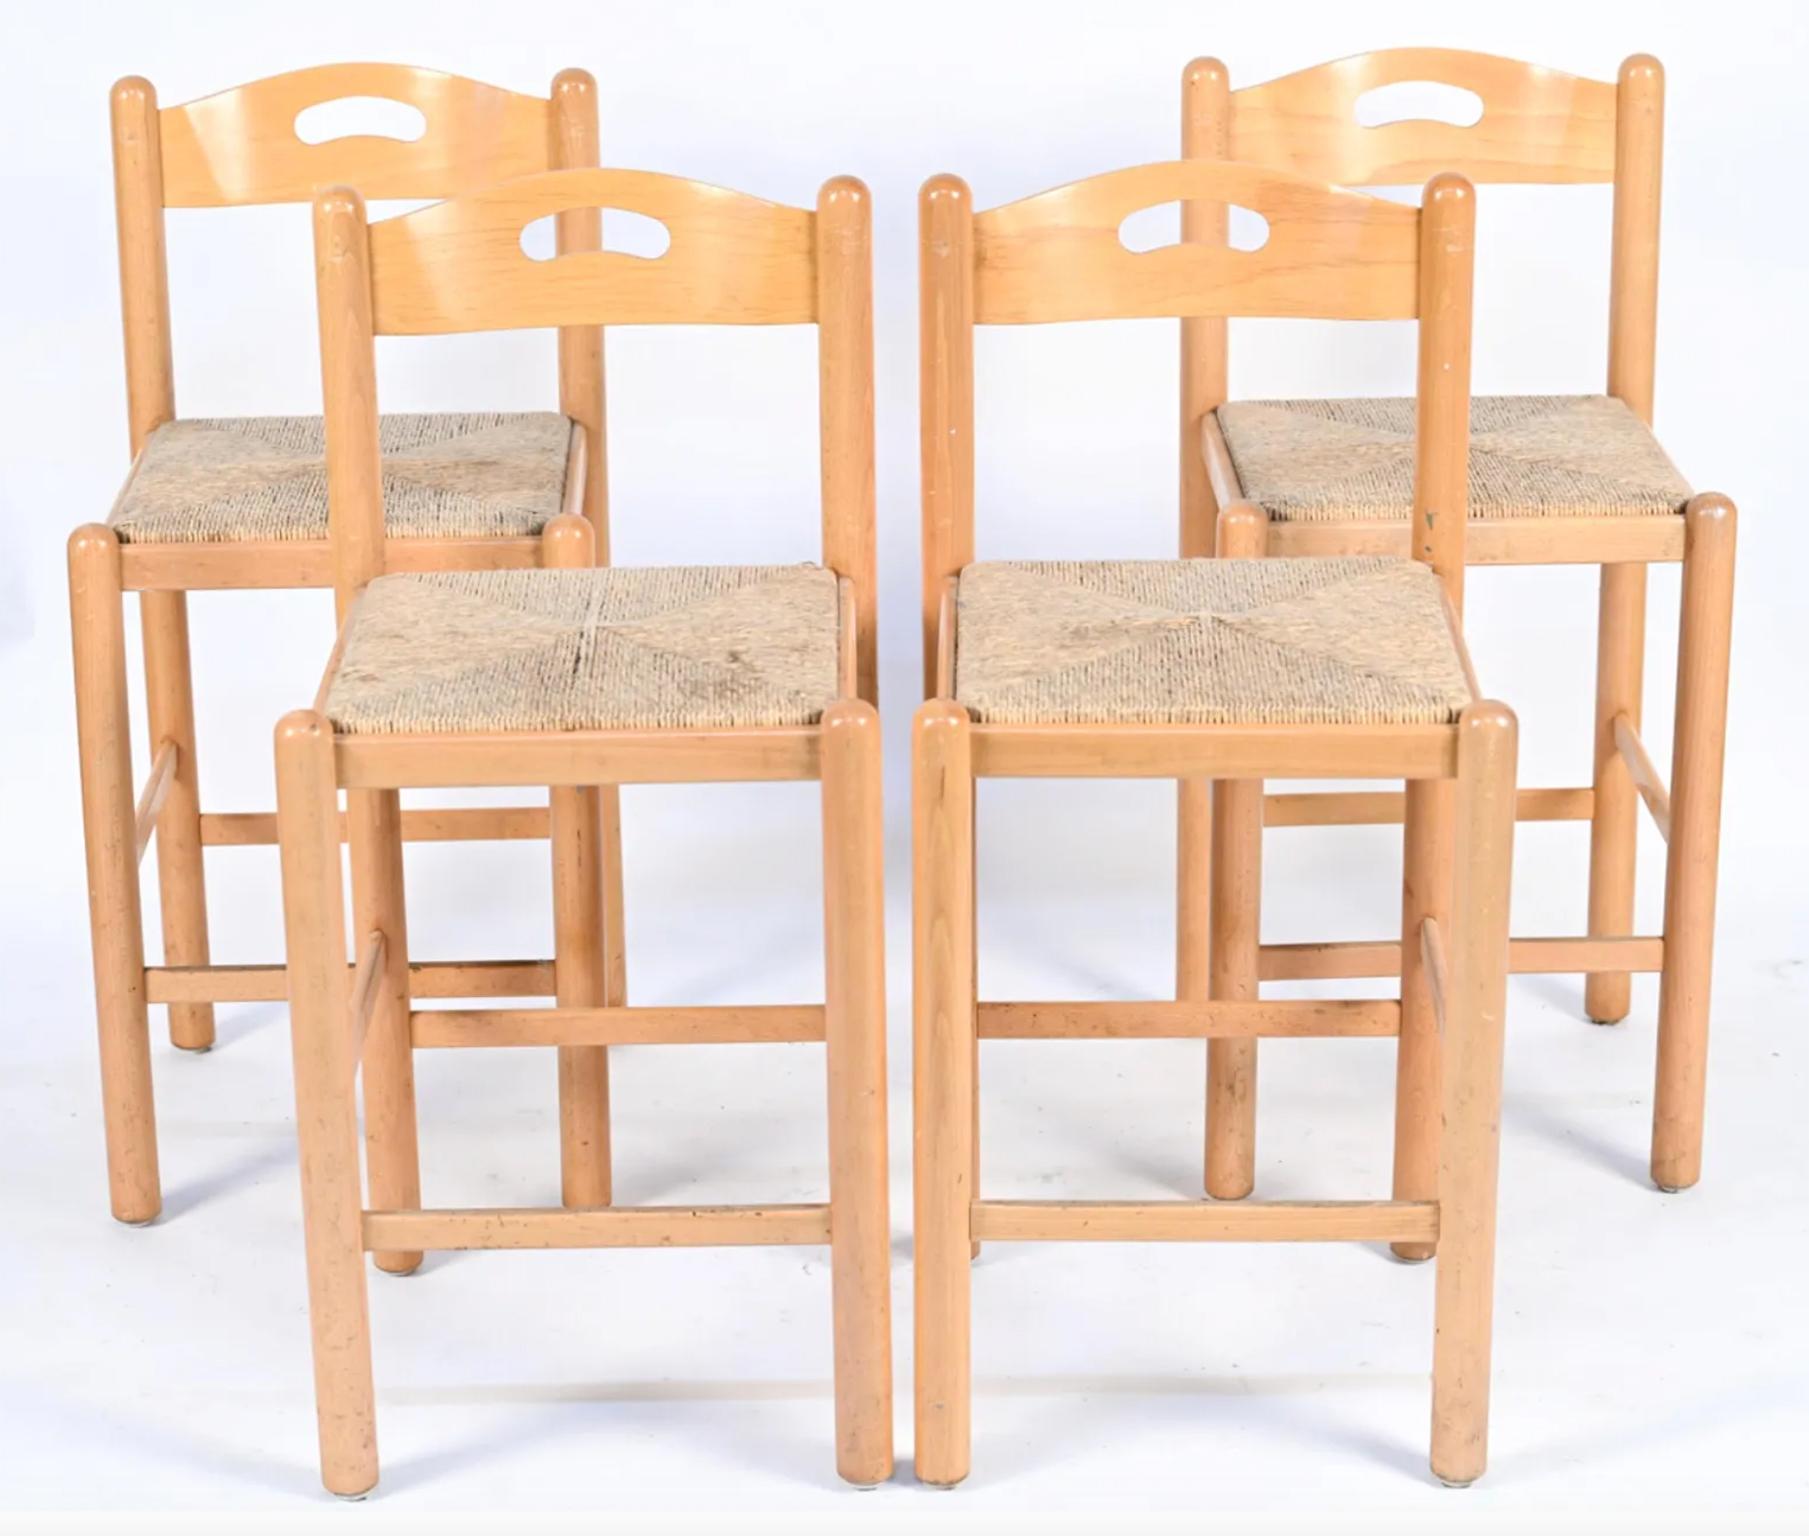 Set of 4 Mid-Century Modern bar stools style of Vico Magistretti. Circular Birch framed and rush woven seats with bent plywood back rests. 24” seat height. Solid sturdy stools in good vintage condition. This listing is for the set of 4 stools.